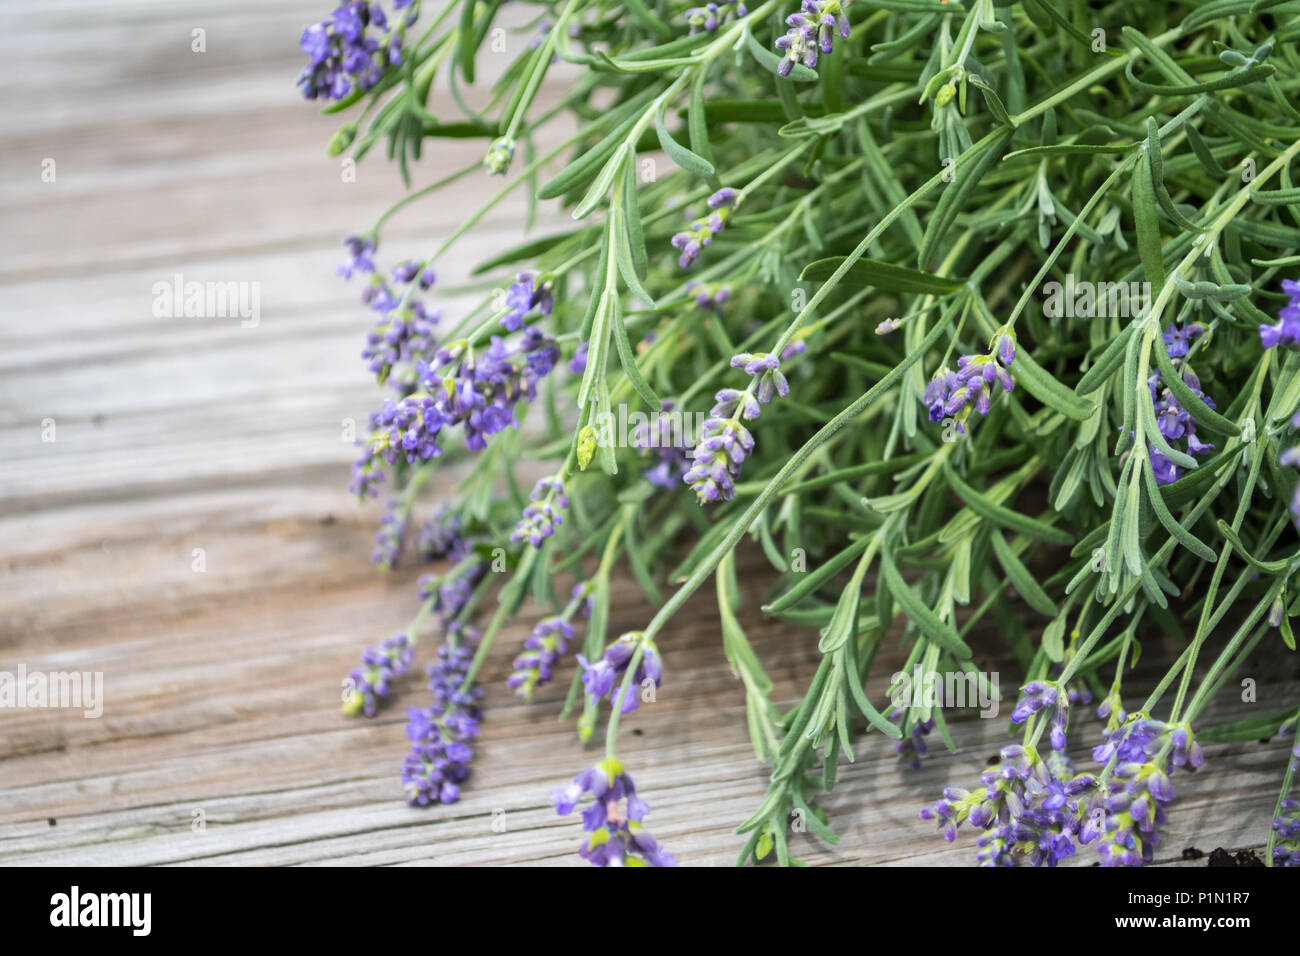 Garden delight with the beauty and scent of lavender. Flowers for herbs, health, and ingredients for gourmet culinary treats right from your garden Stock Photo